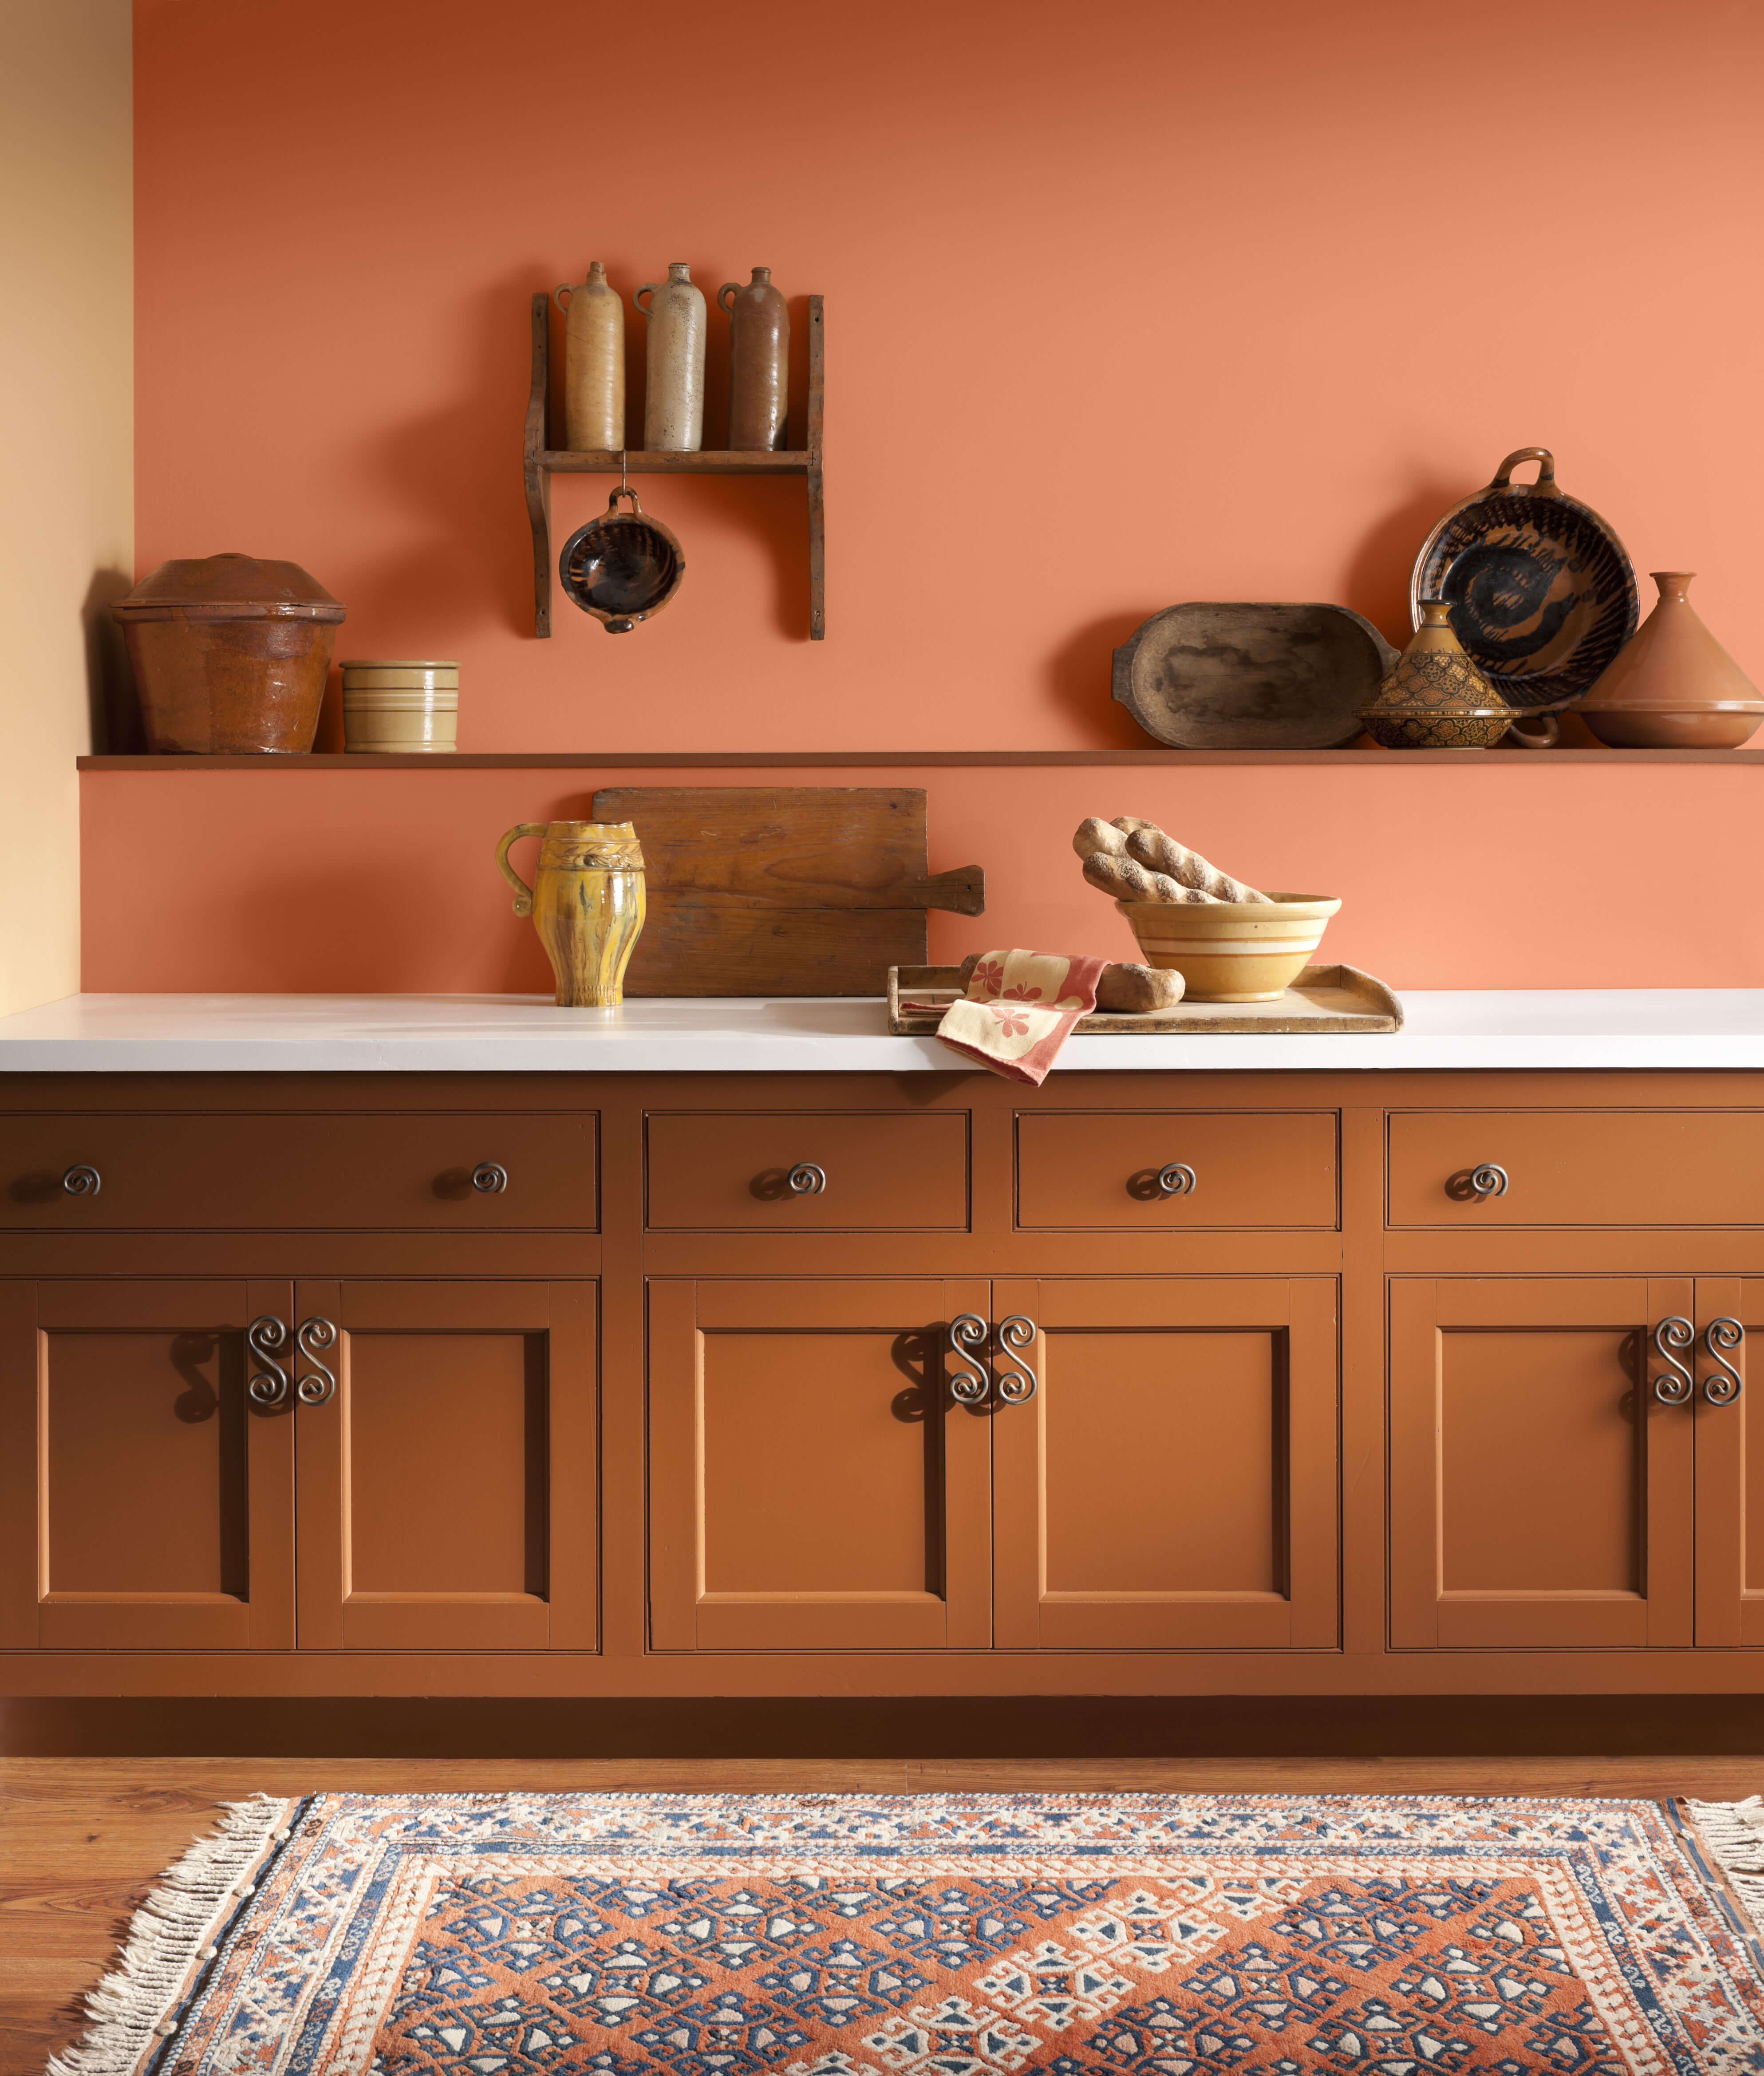 How to paint kitchen cabinets